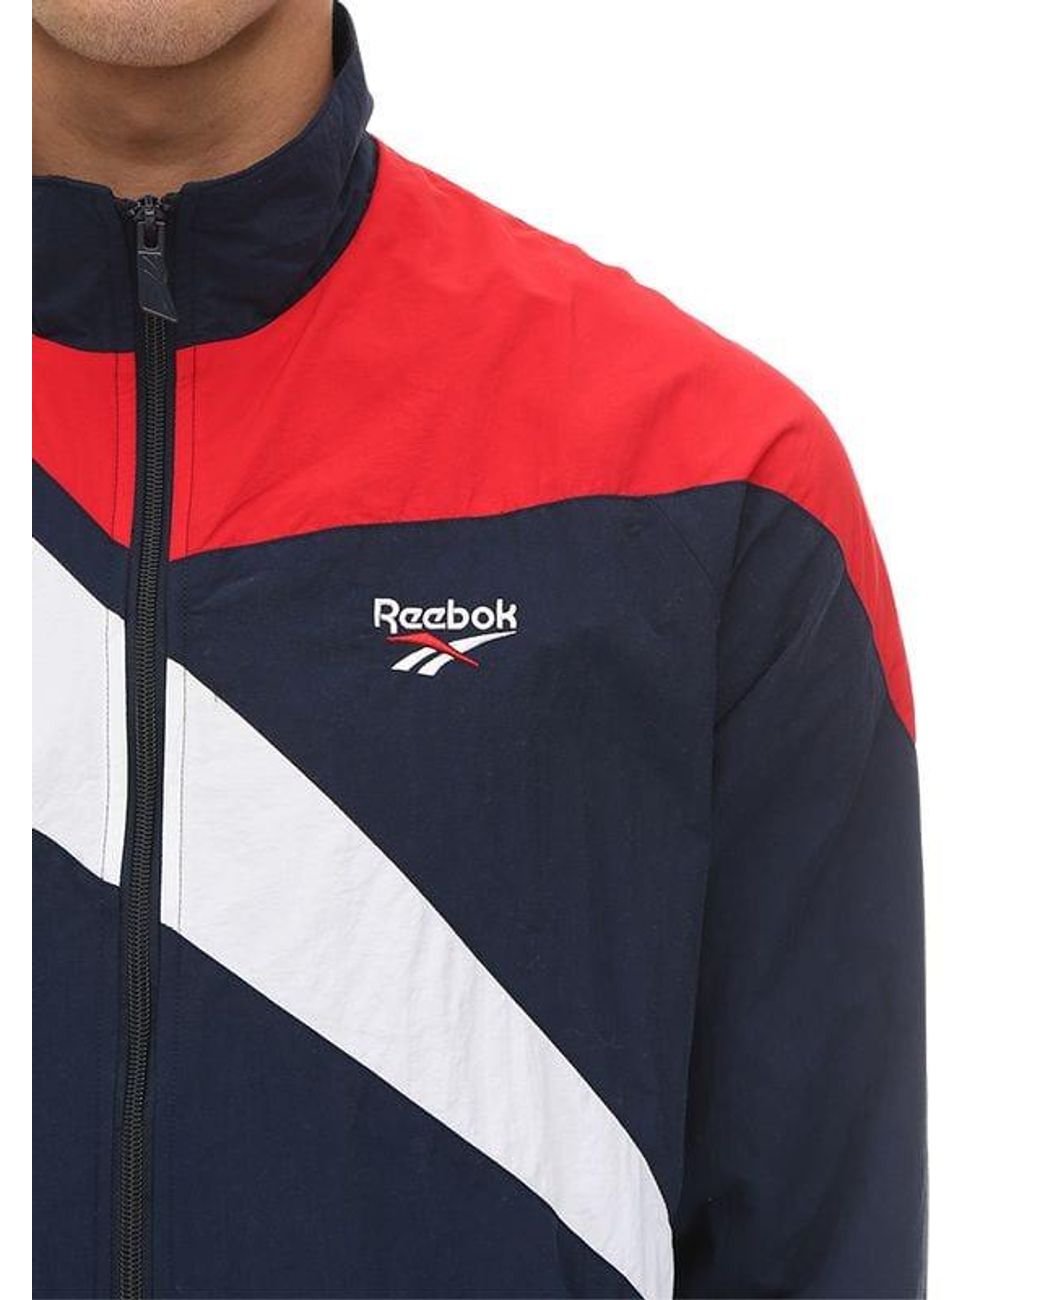 reebok lf vector navy and red track top